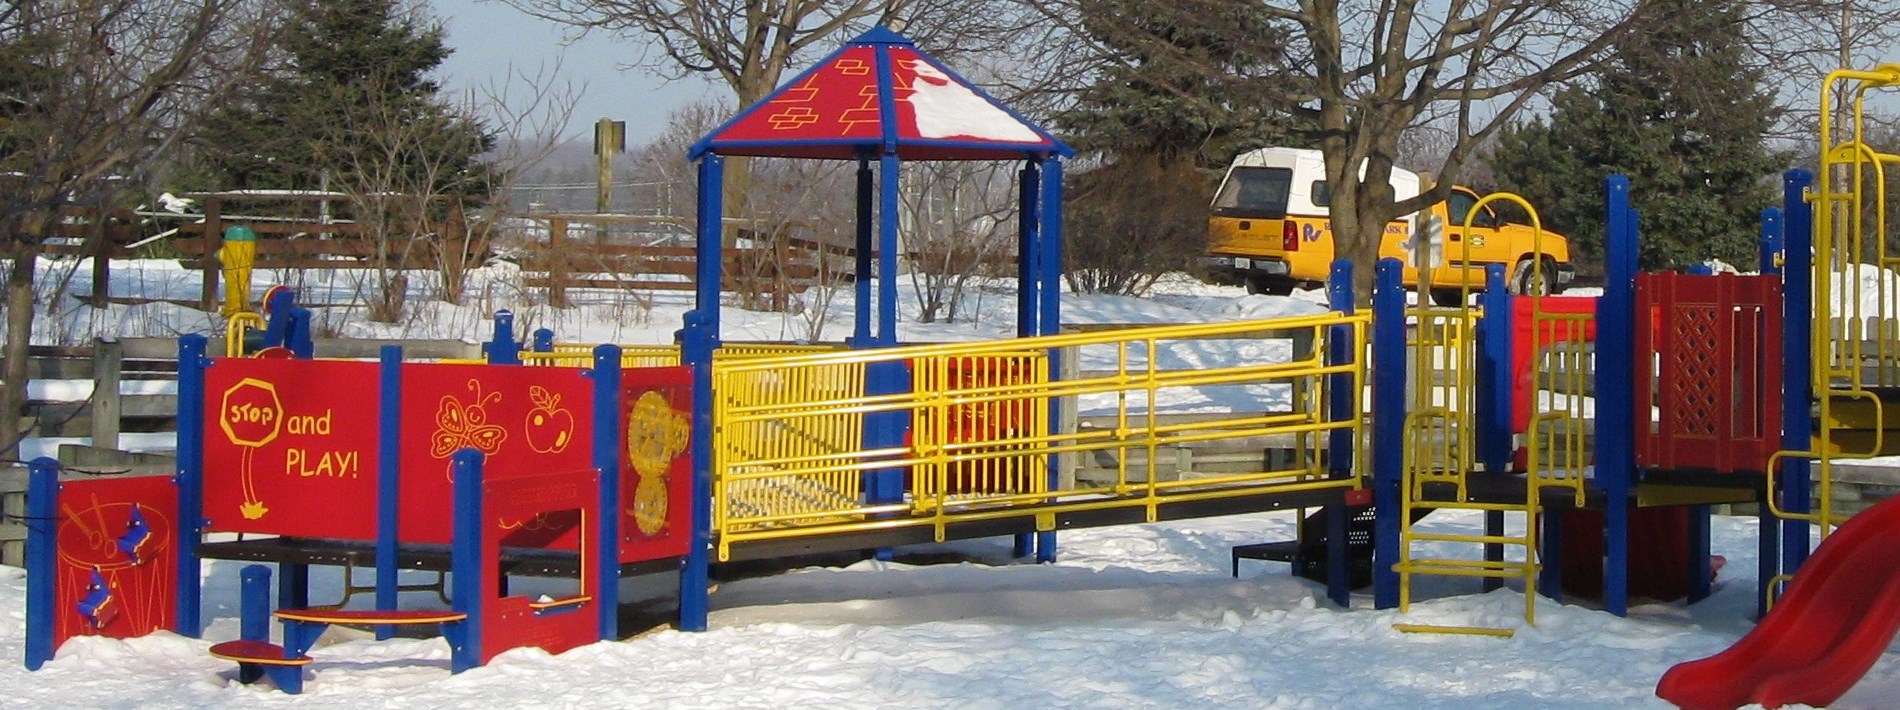 Riverview Park and Zoo playground